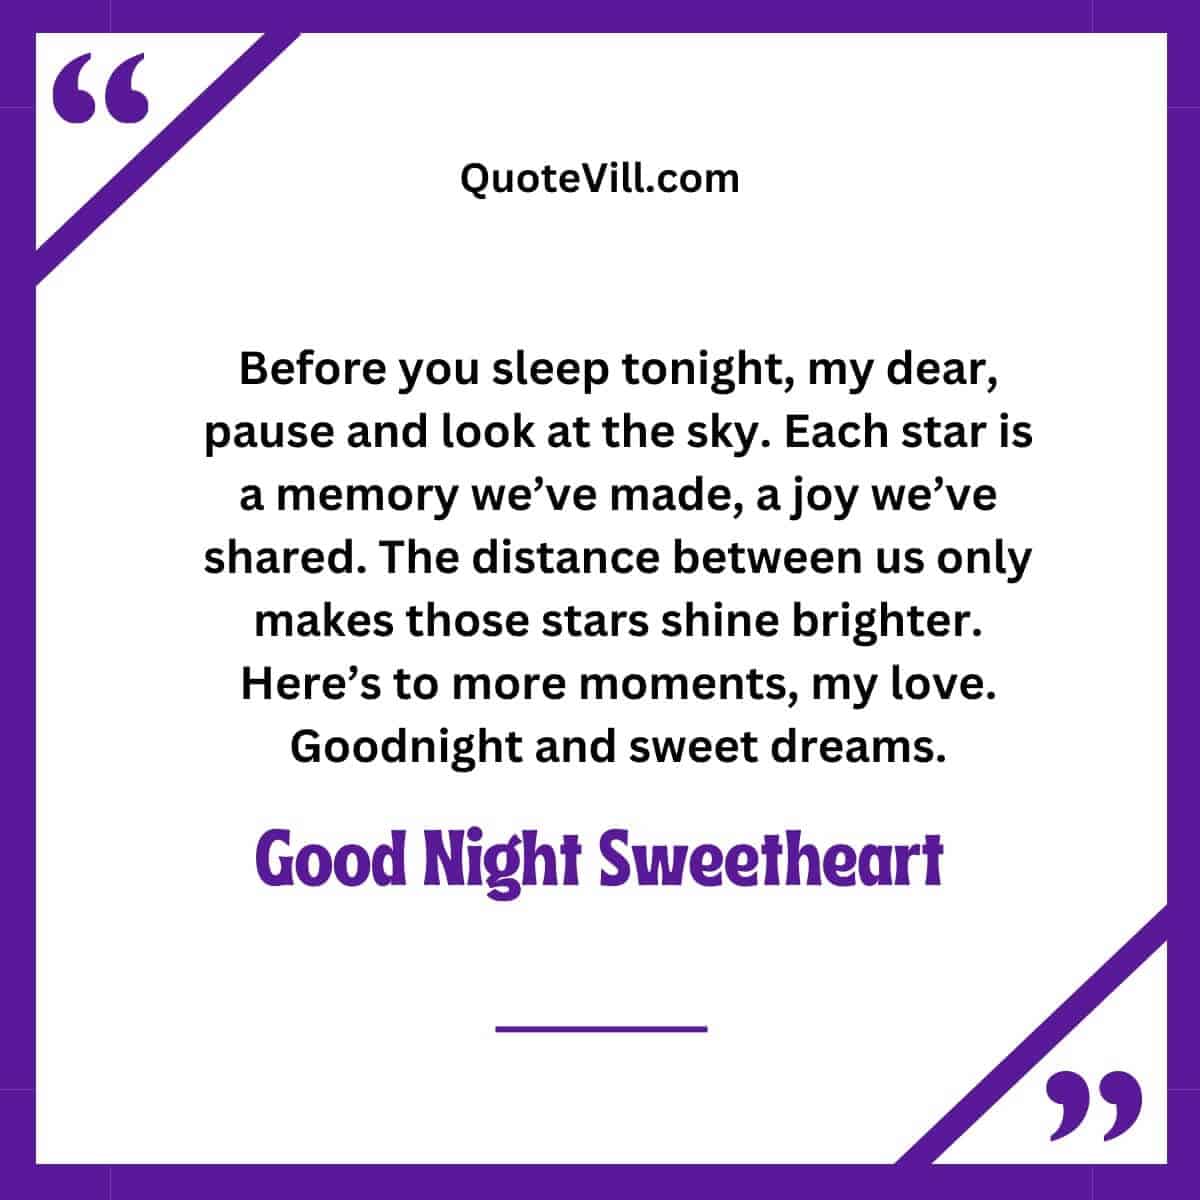 Long Good Night Message To Make Her Fall In Love With You